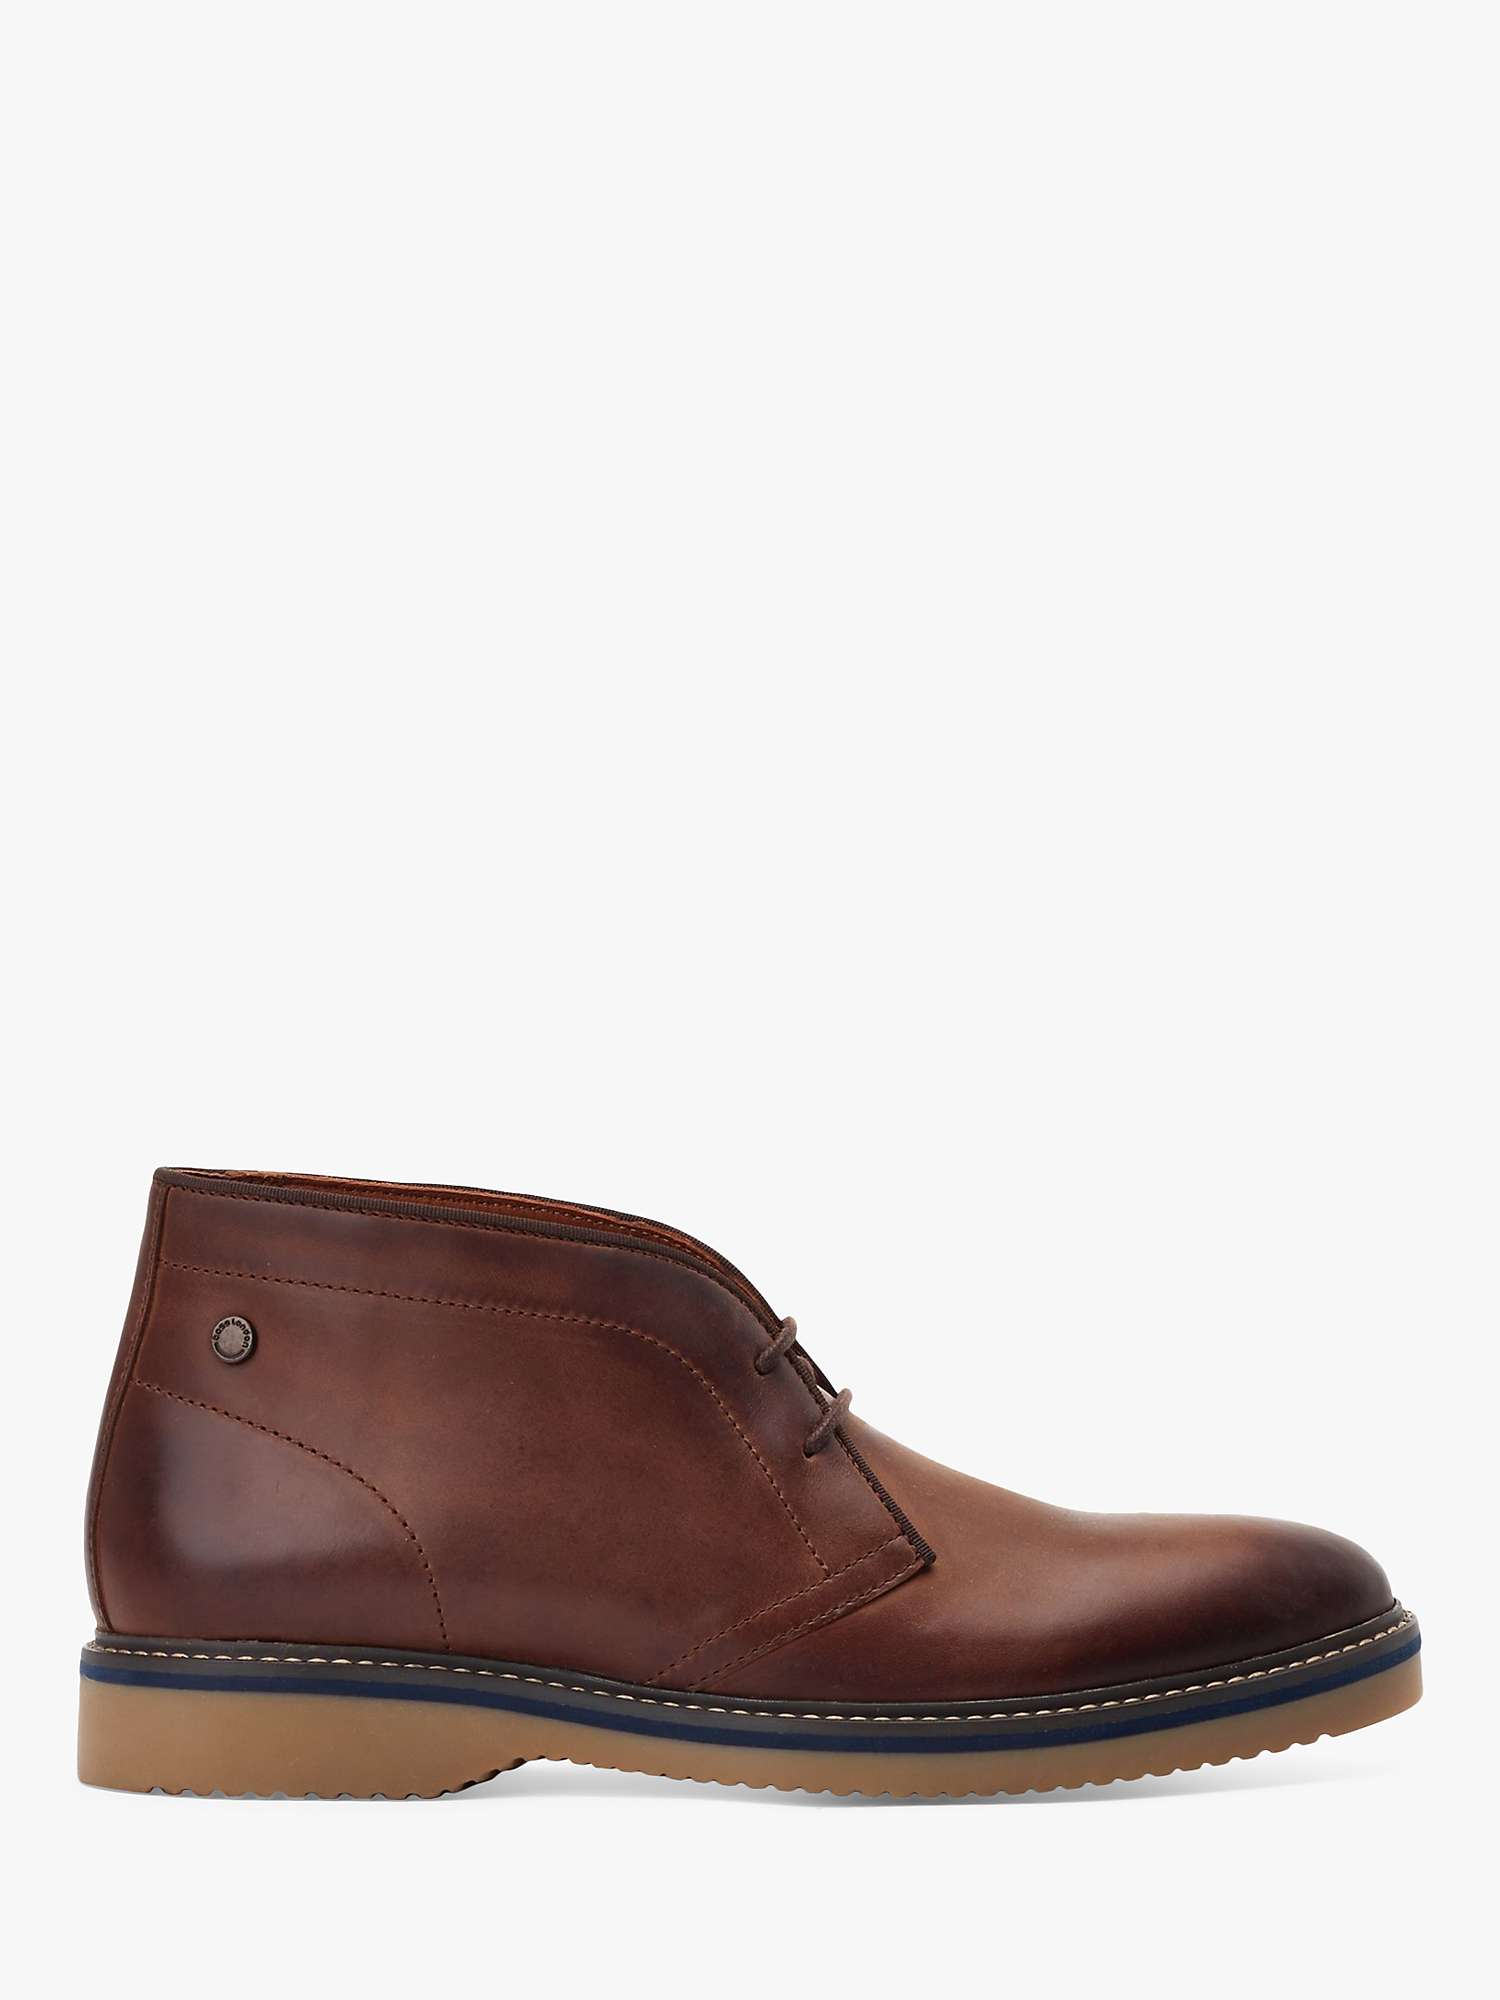 Buy Base London Brody Leather Chukka Boots, Burnt Brown Online at johnlewis.com